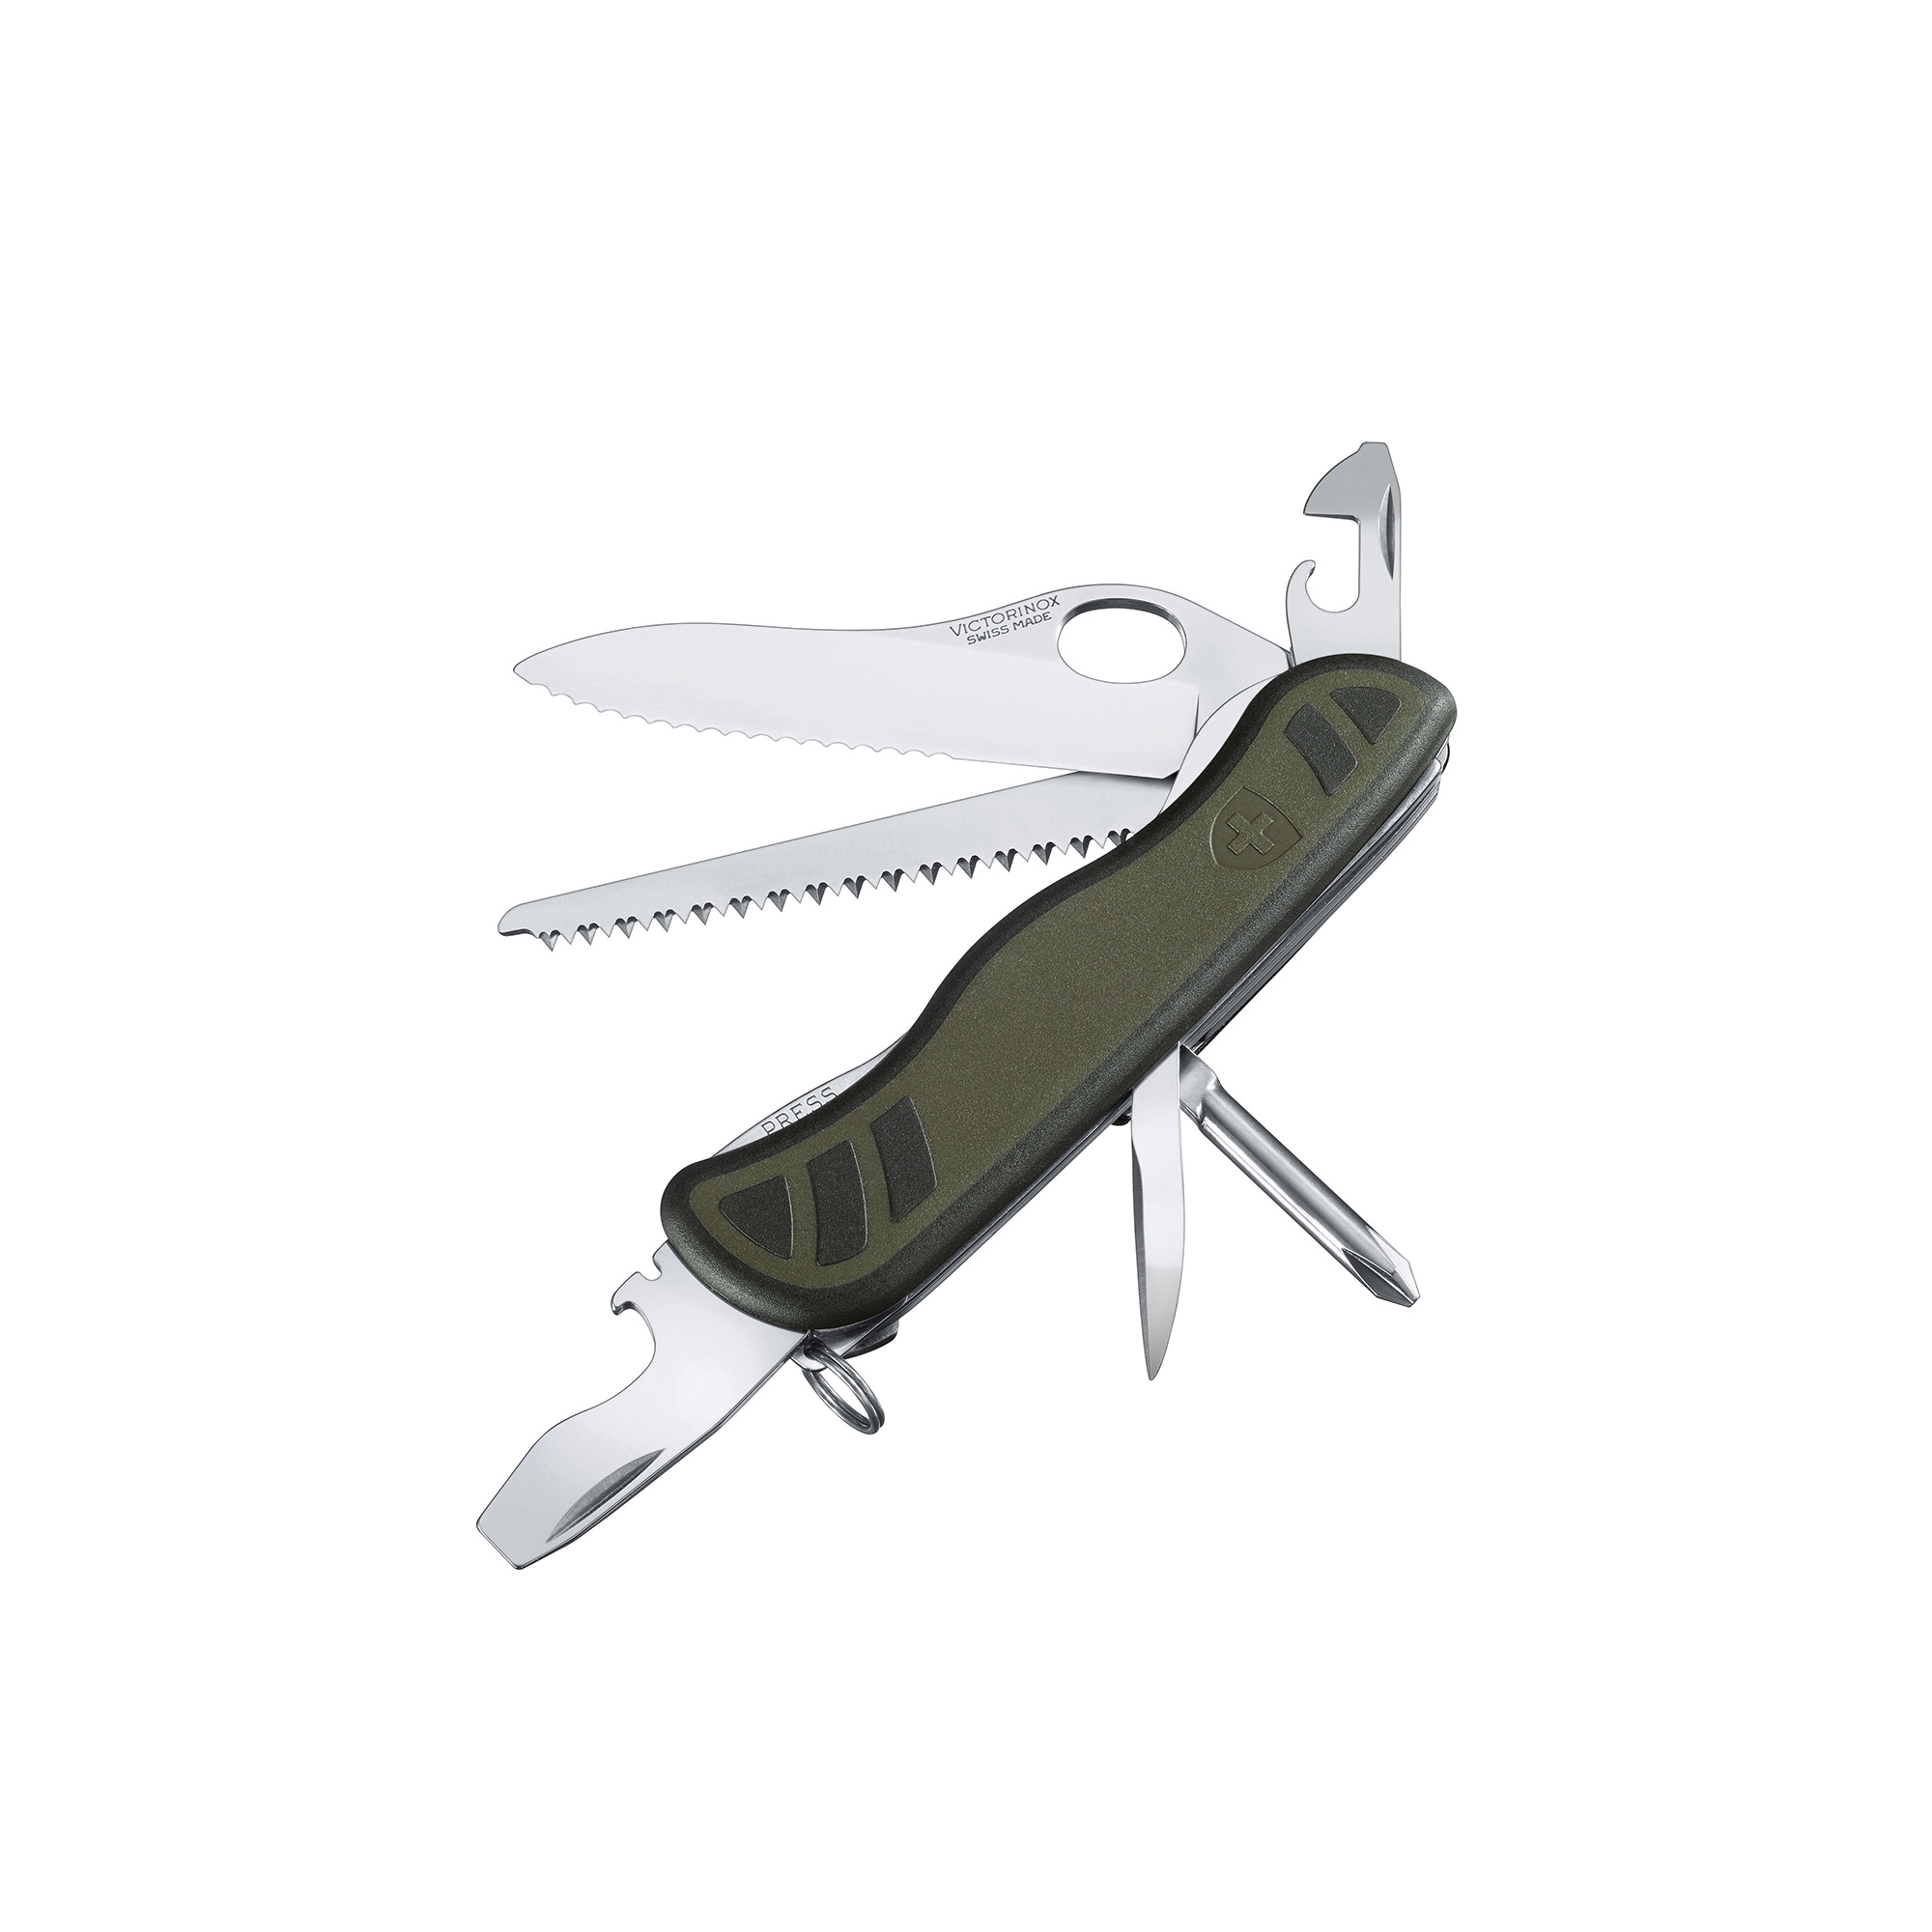 Victorinox New Official Swiss Soldiers Knife Image 1